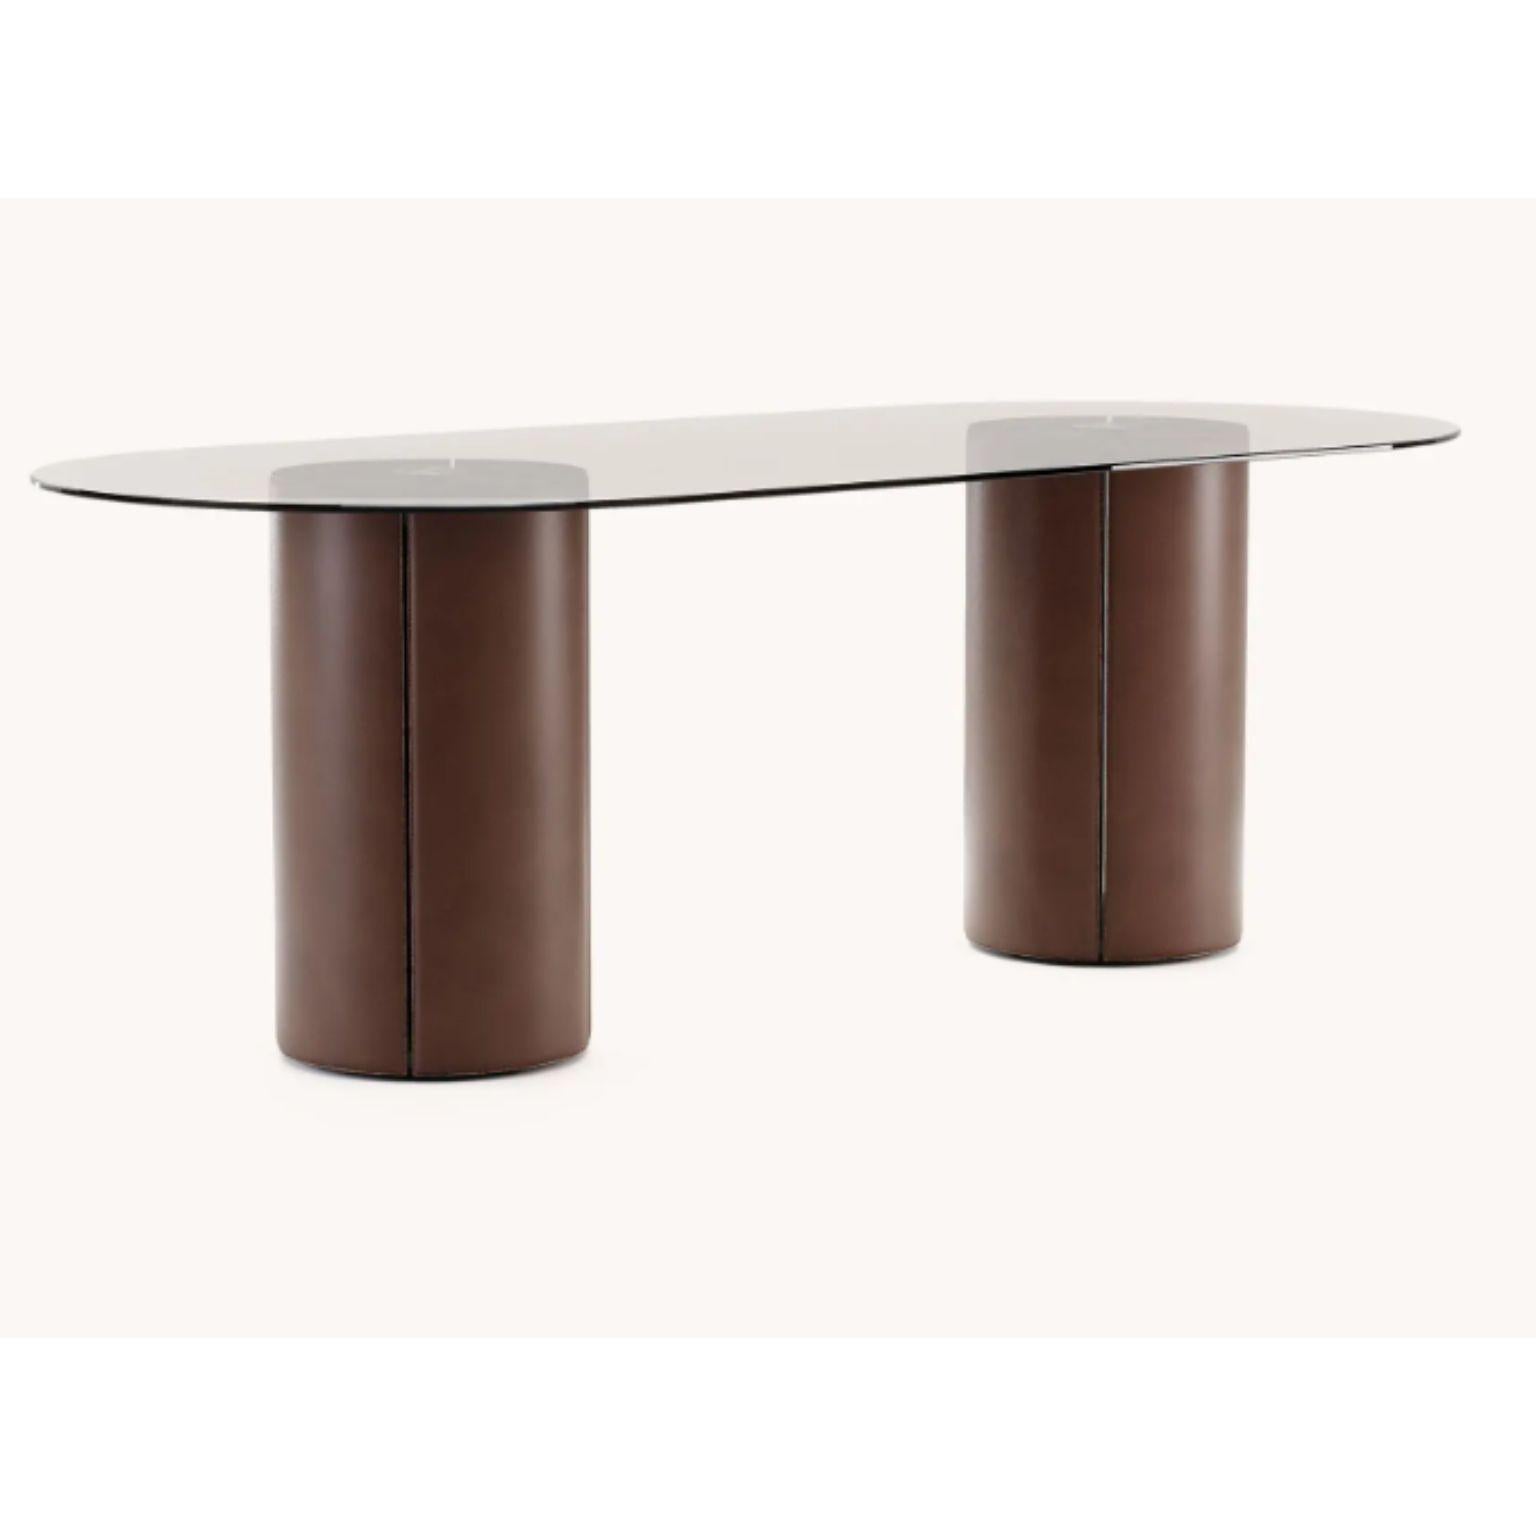 Oval Mano dining table by Domkapa
Dimensions: W 220 x D 100 x H 75 cm.
Materials: Black lacquered matte, natural leather (Albany Terra), bronze mirror.
Also available in different materials.

With classic materials and an outstanding shape,